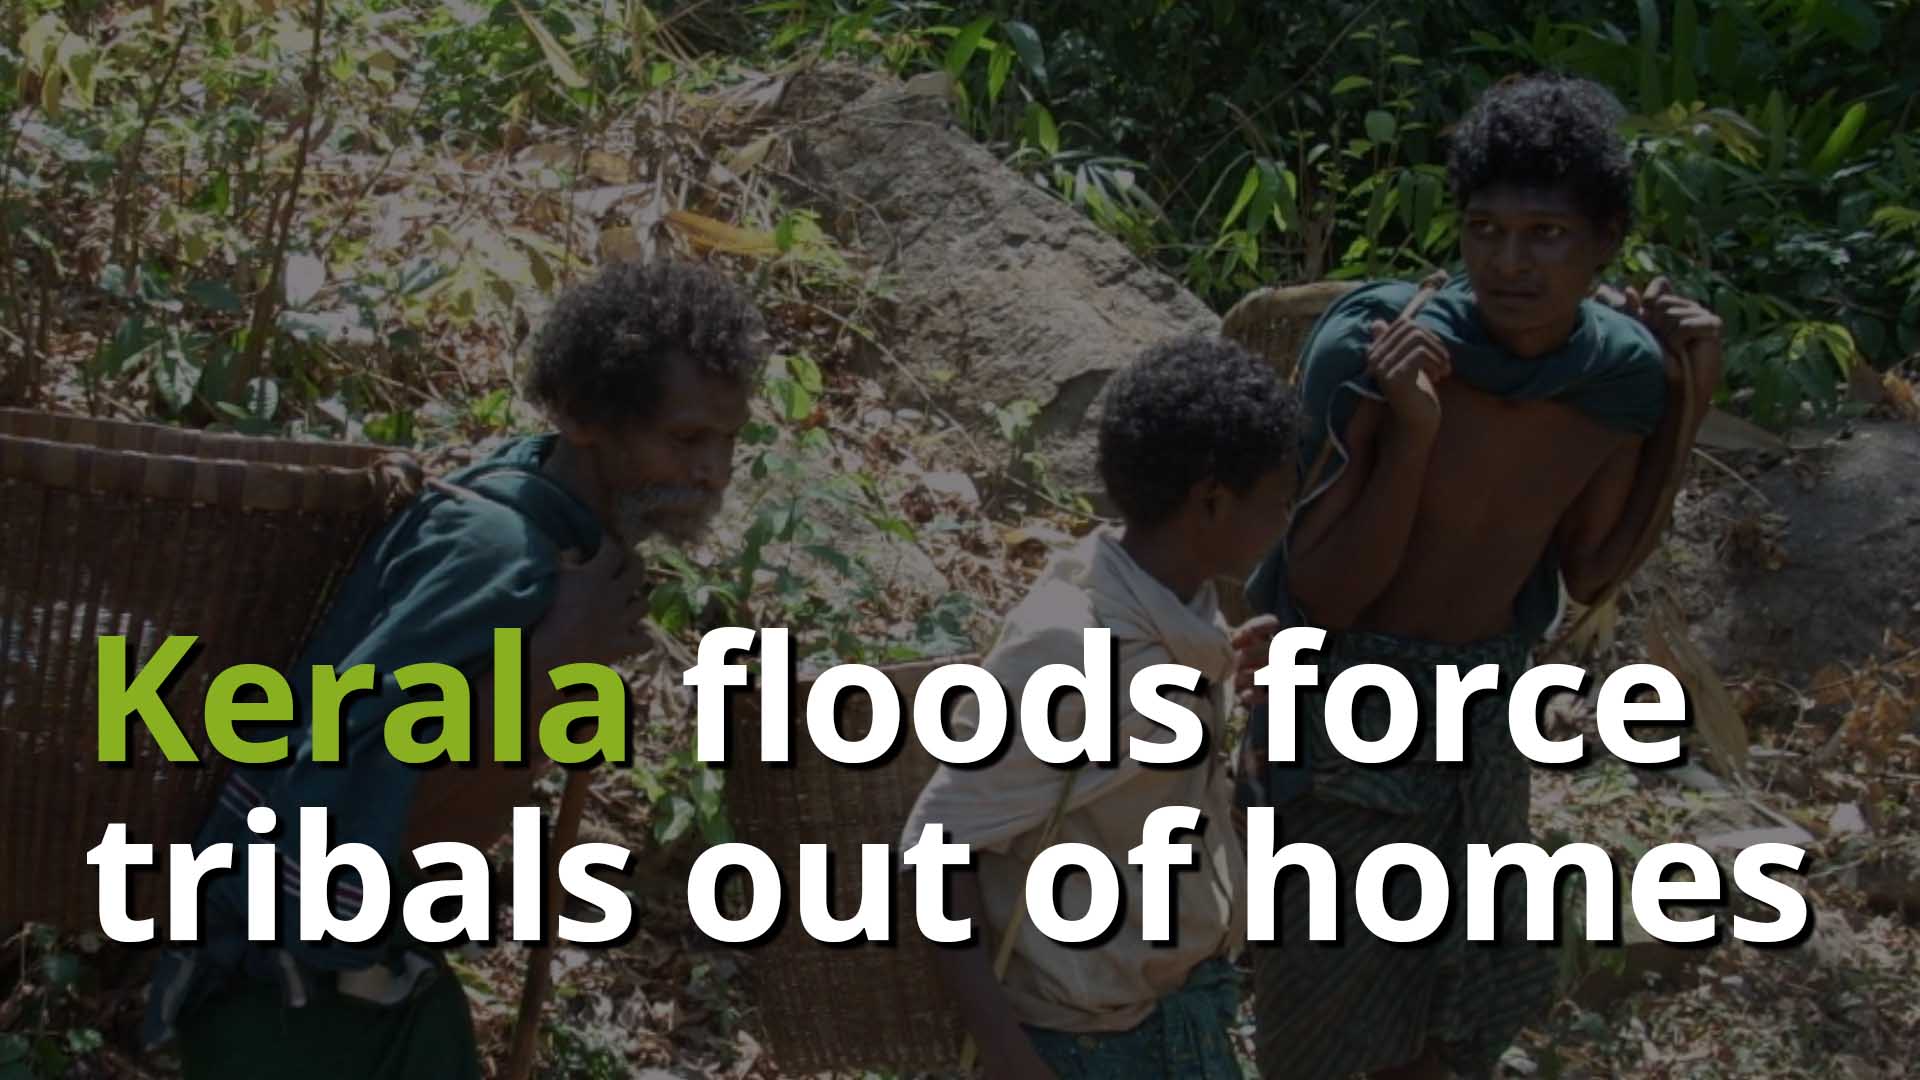 Kerala floods force tribals out of homes, forests